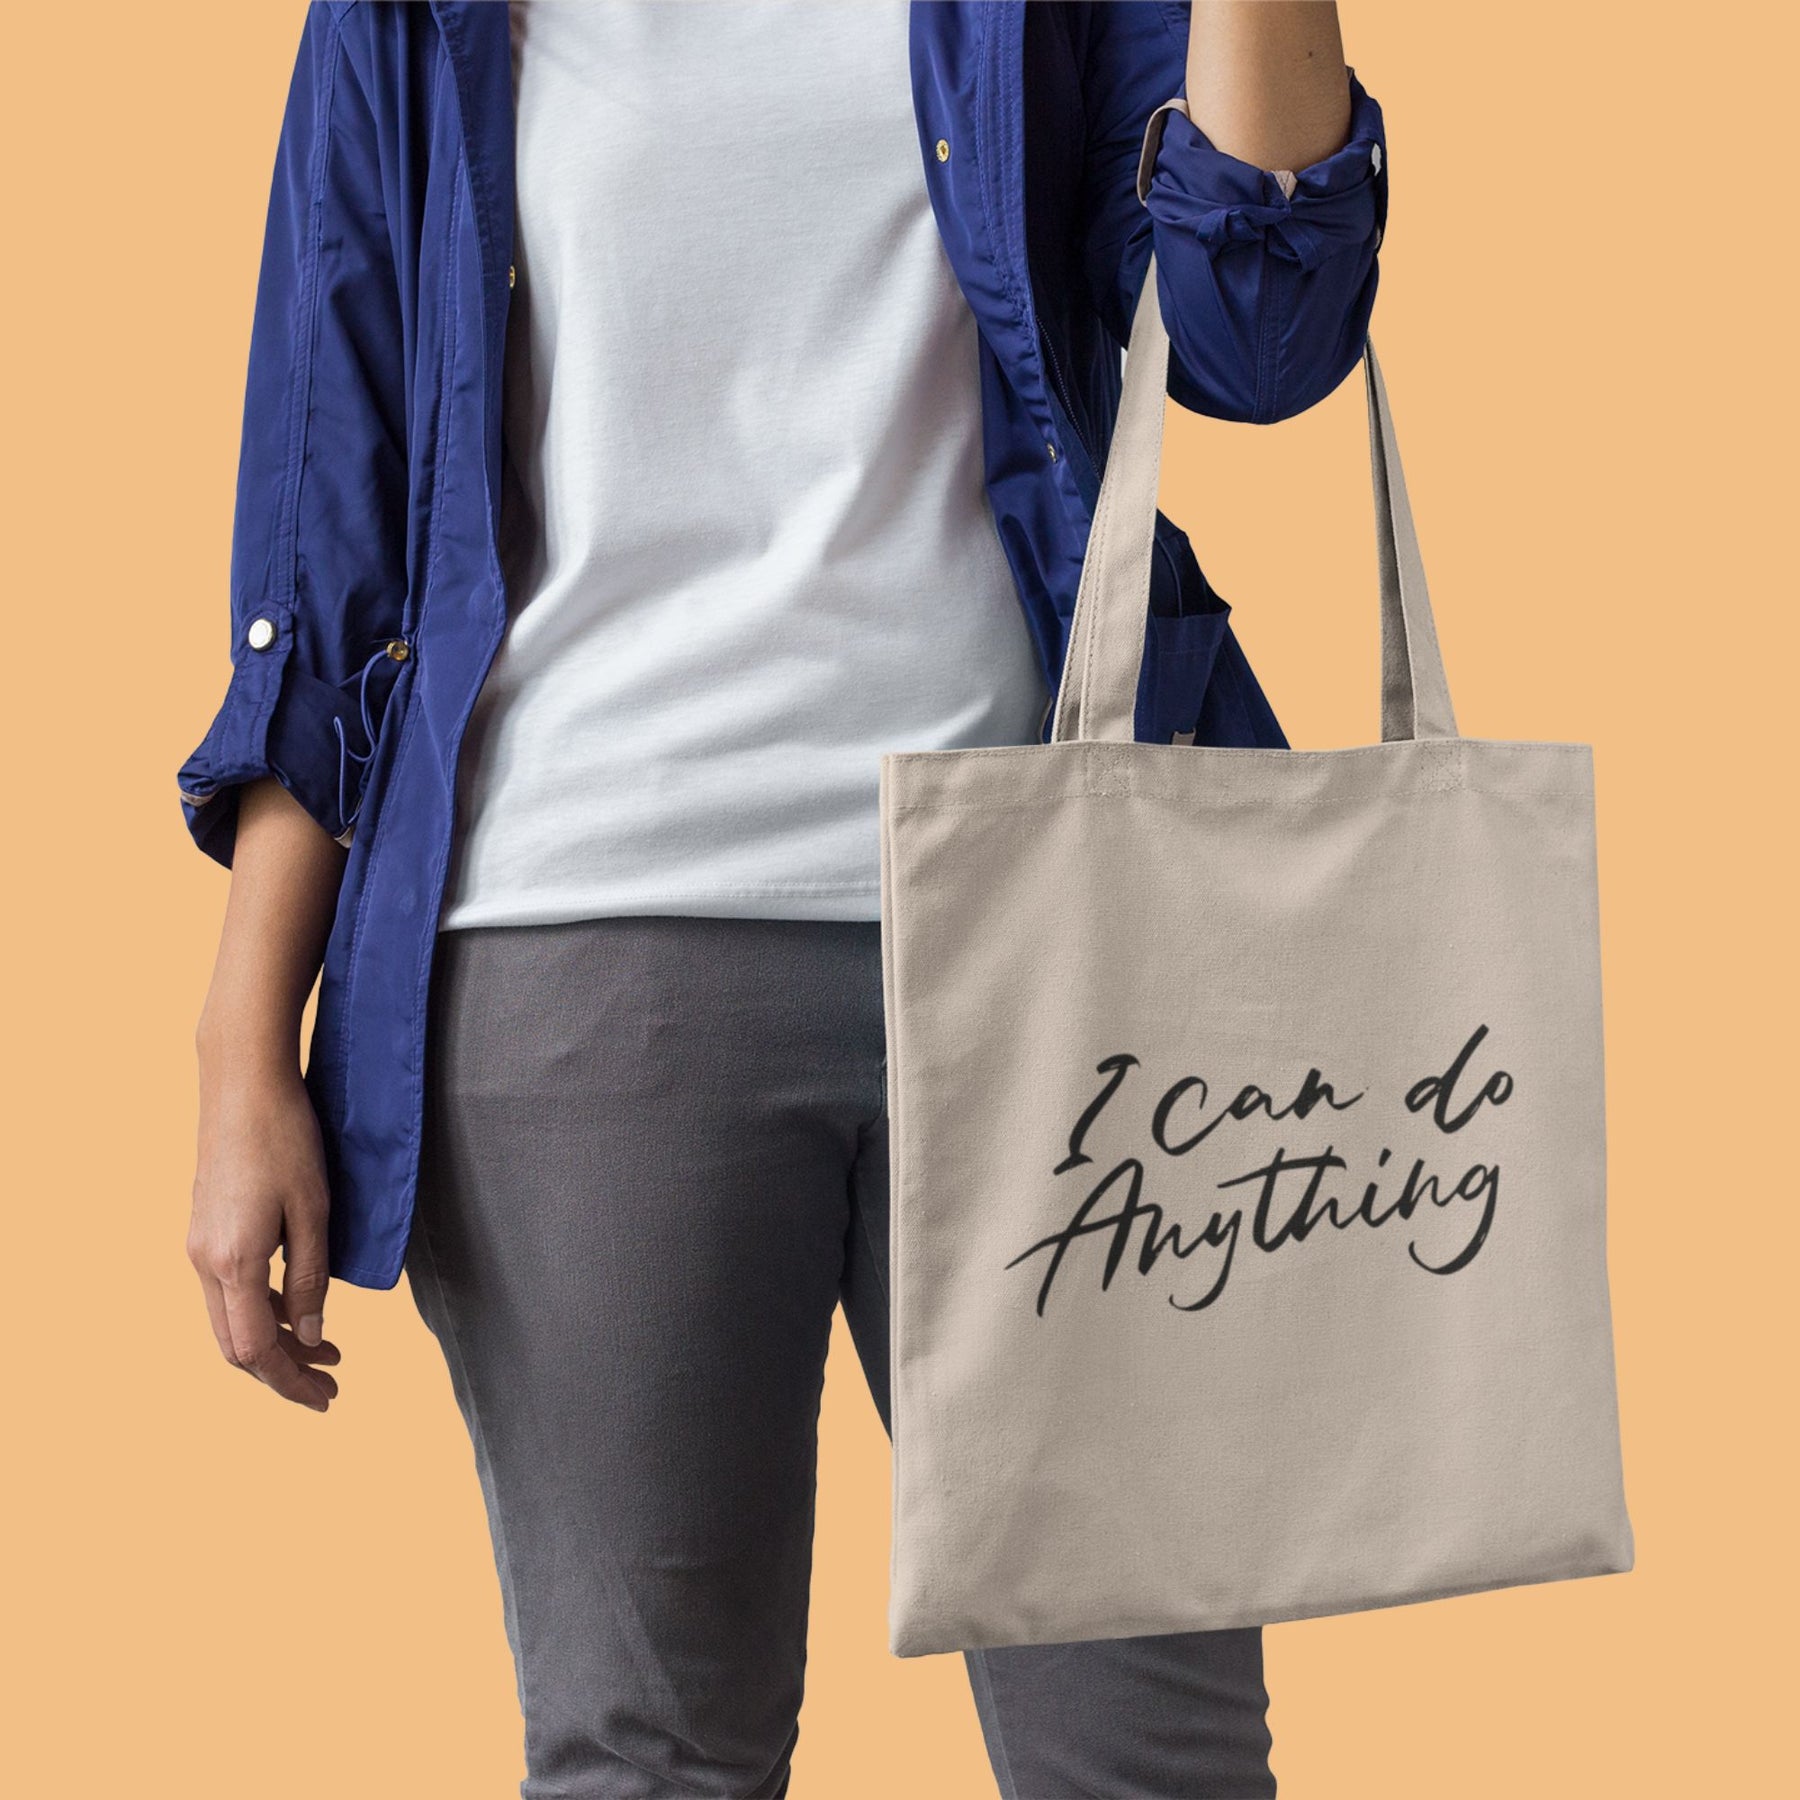 i-can-do-angthing-cotton-printed-creamy-white-tote-bag-gogirgit-2